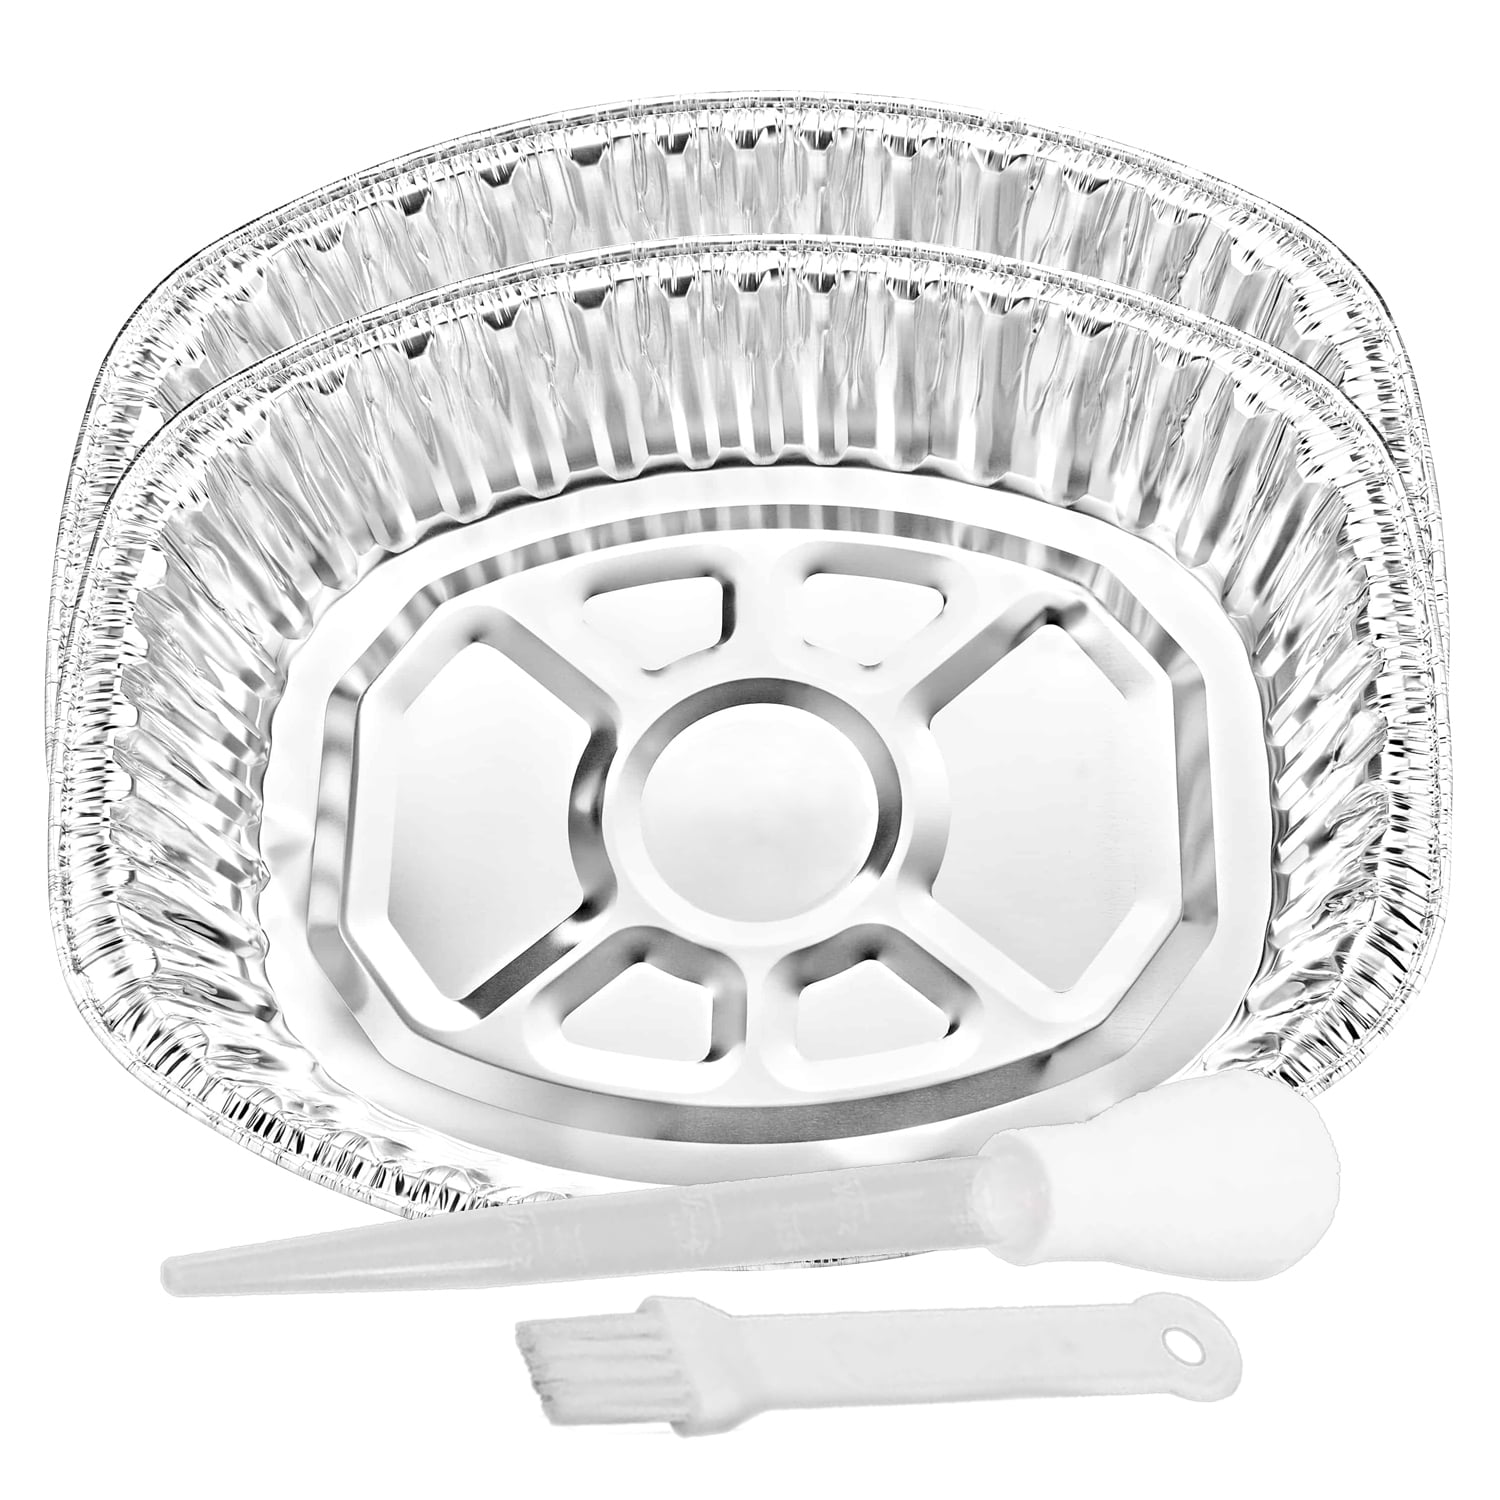 SONGLAM 5 Pack X-Large Aluminum Turkey Pans 17 x 13 - Disposable Roasting  Pan, Full Size Disposable Trays for Steam Table, Food, Grills, Baking, BBQ  